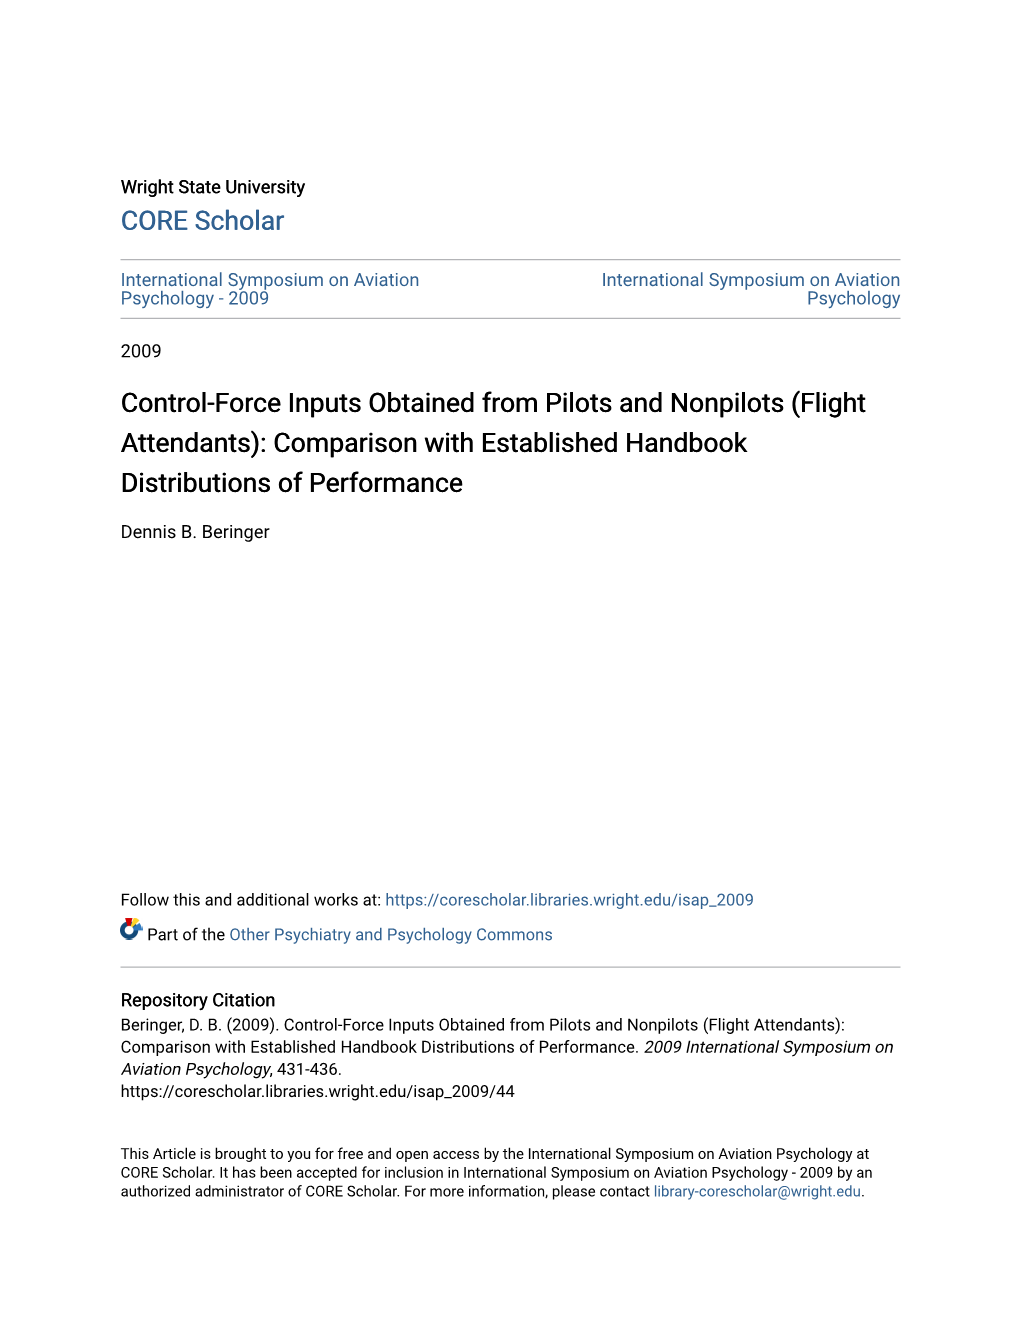 Control-Force Inputs Obtained from Pilots and Nonpilots (Flight Attendants): Comparison with Established Handbook Distributions of Performance